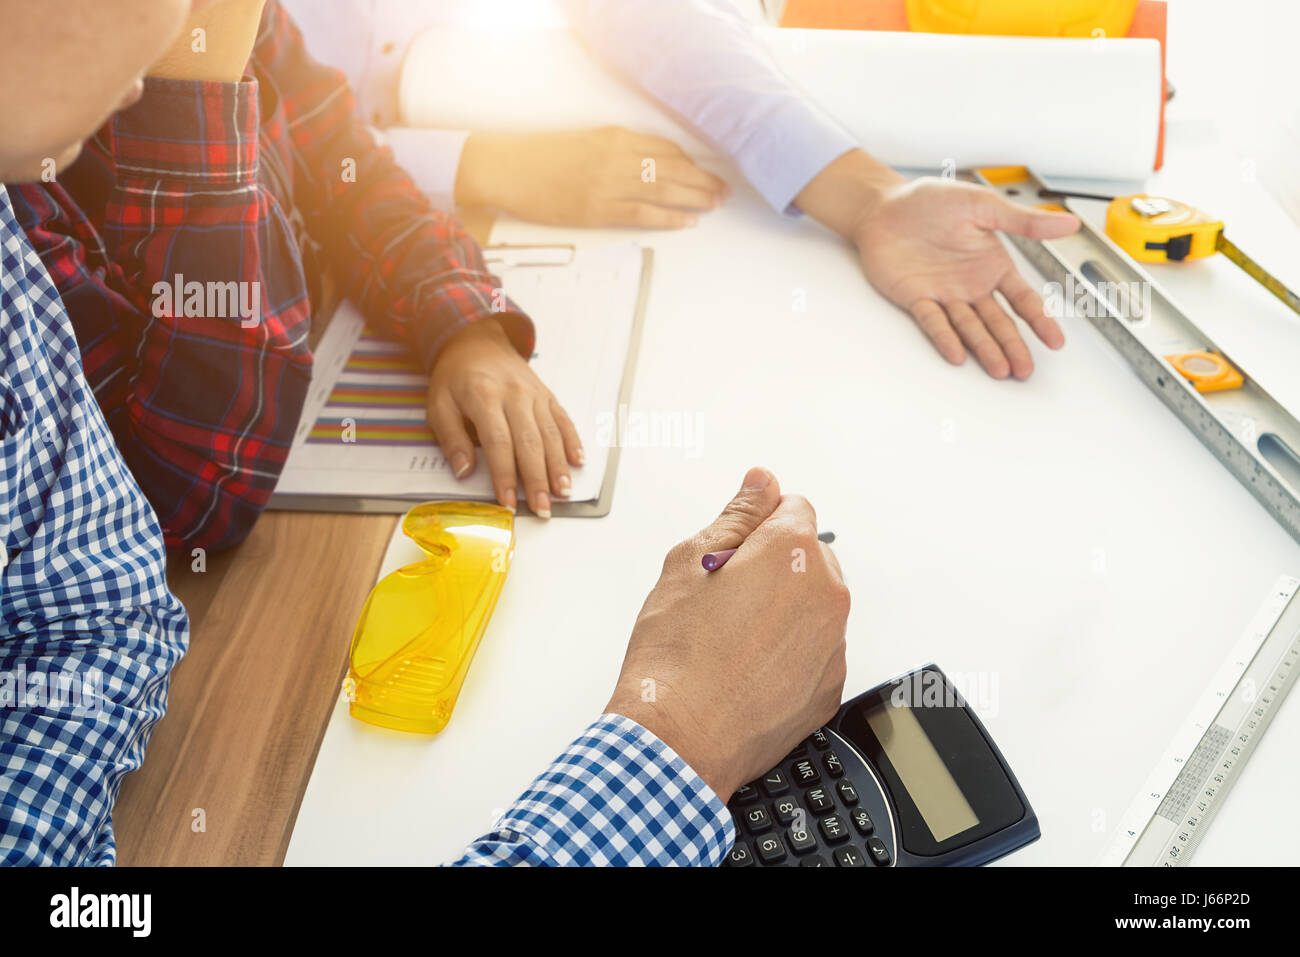 Image of engineer meeting for architectural project. working with partner and engineering tools on workplace. Engineer, discussing, architect concept. Stock Photo